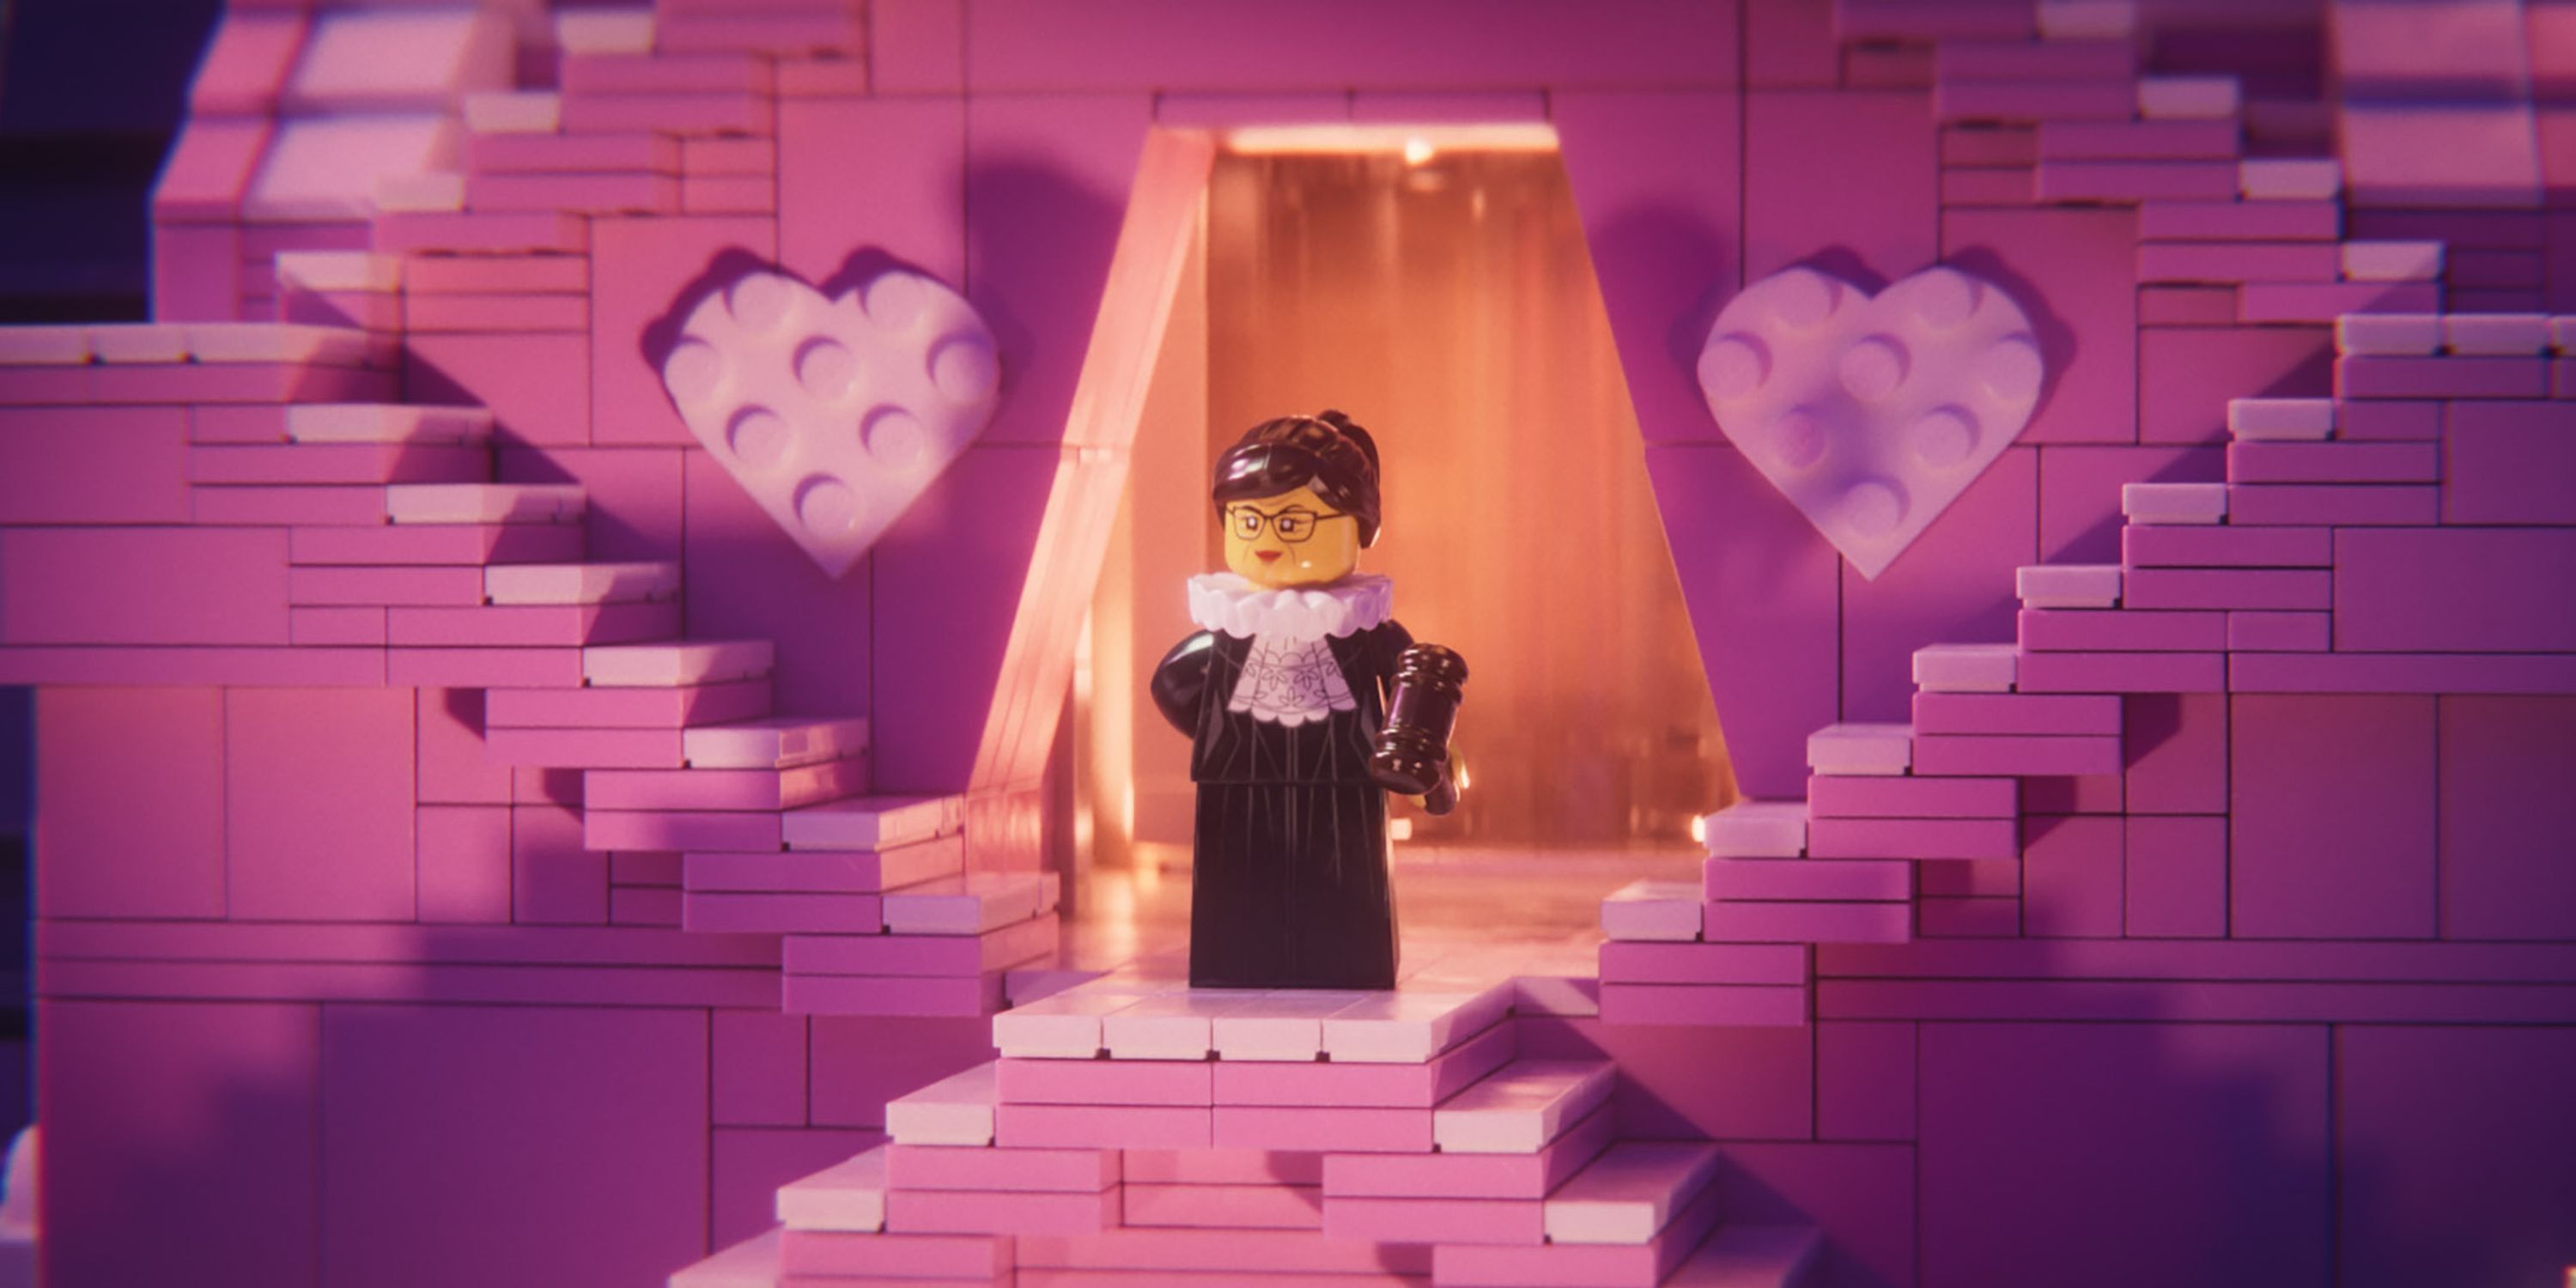 Ruth Bader Ginsburg in The Lego Movie 2